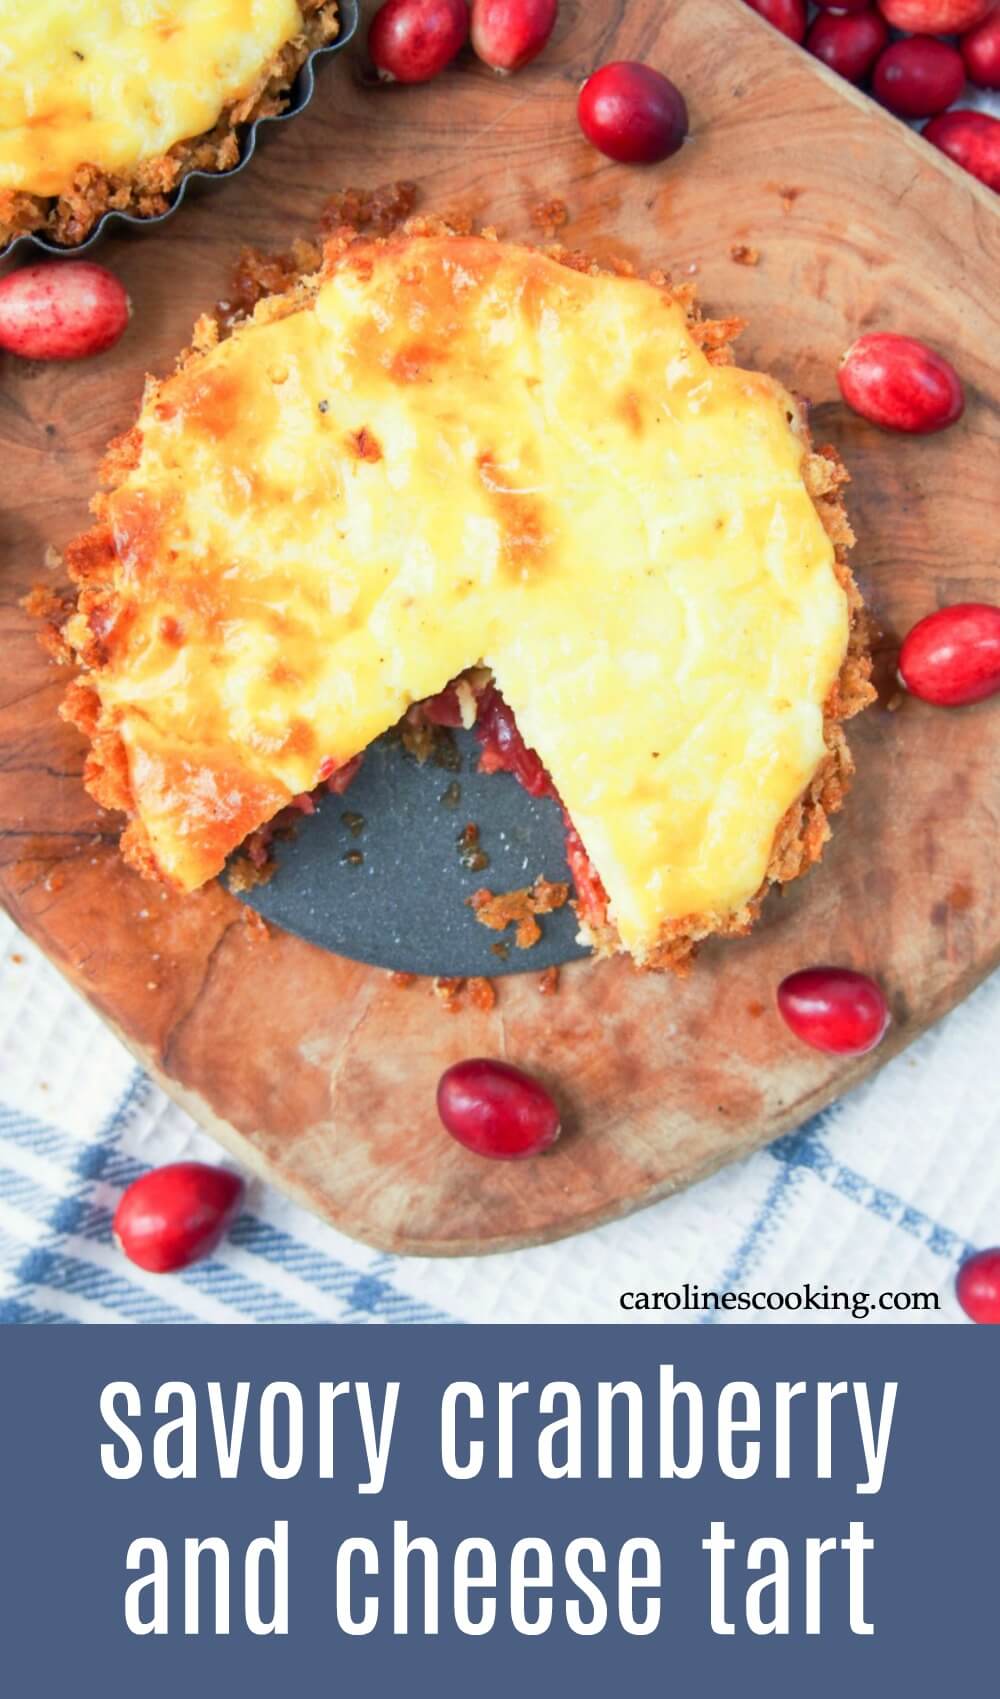 This savory cranberry and cheese tart is a great way to use Thanksgiving leftovers in a delicious new way - sweet and savory, it's easy and so good.  #cranberrysauce #leftovers